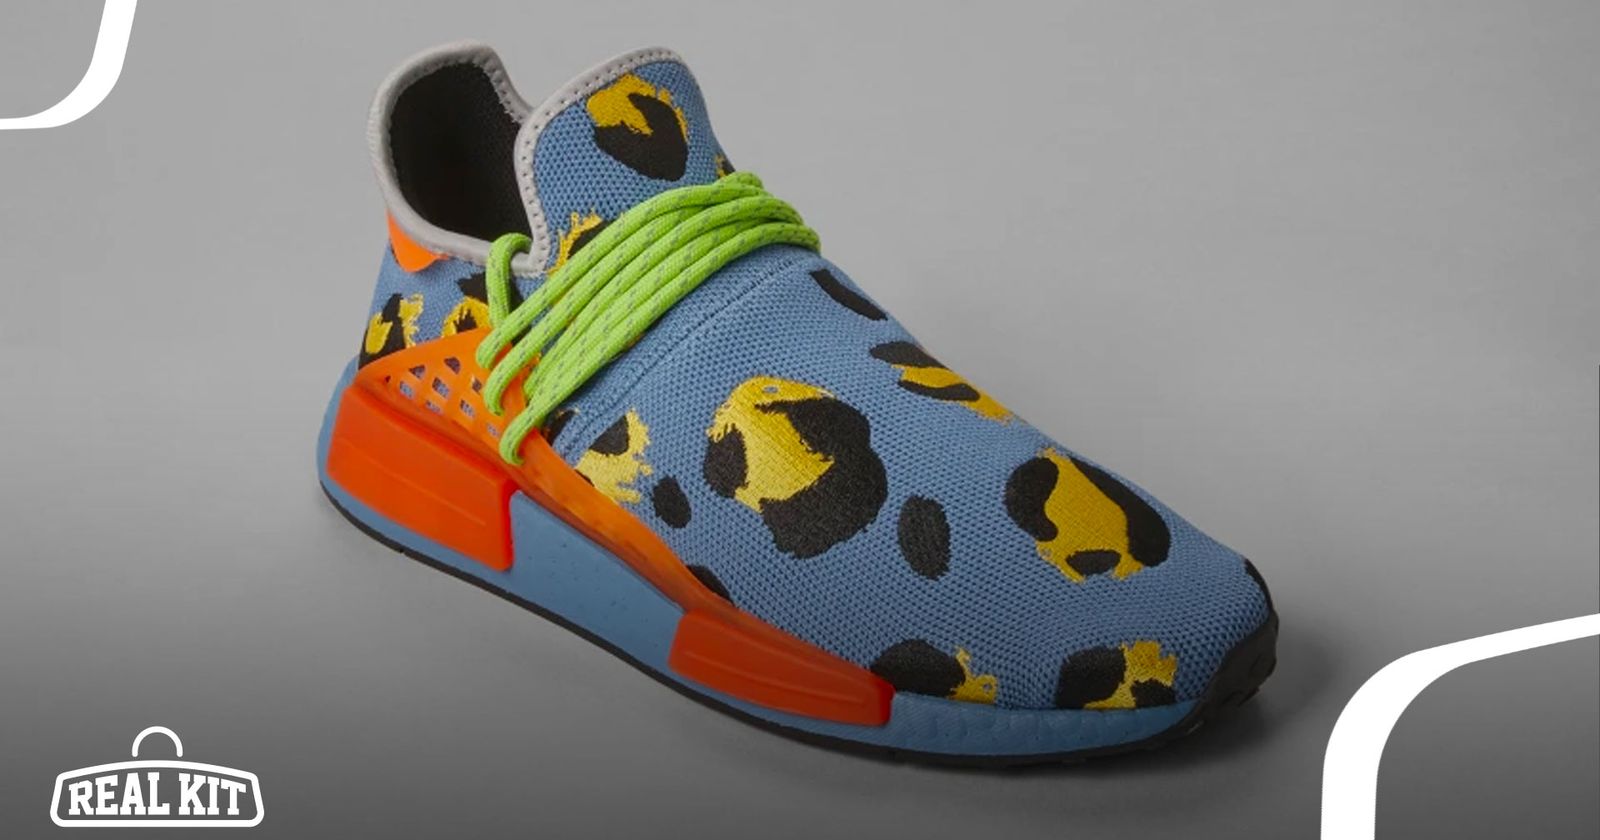 Another 'Animal Print' Pharrell x Adidas NMD Hu Colorway Is Releasing Soon